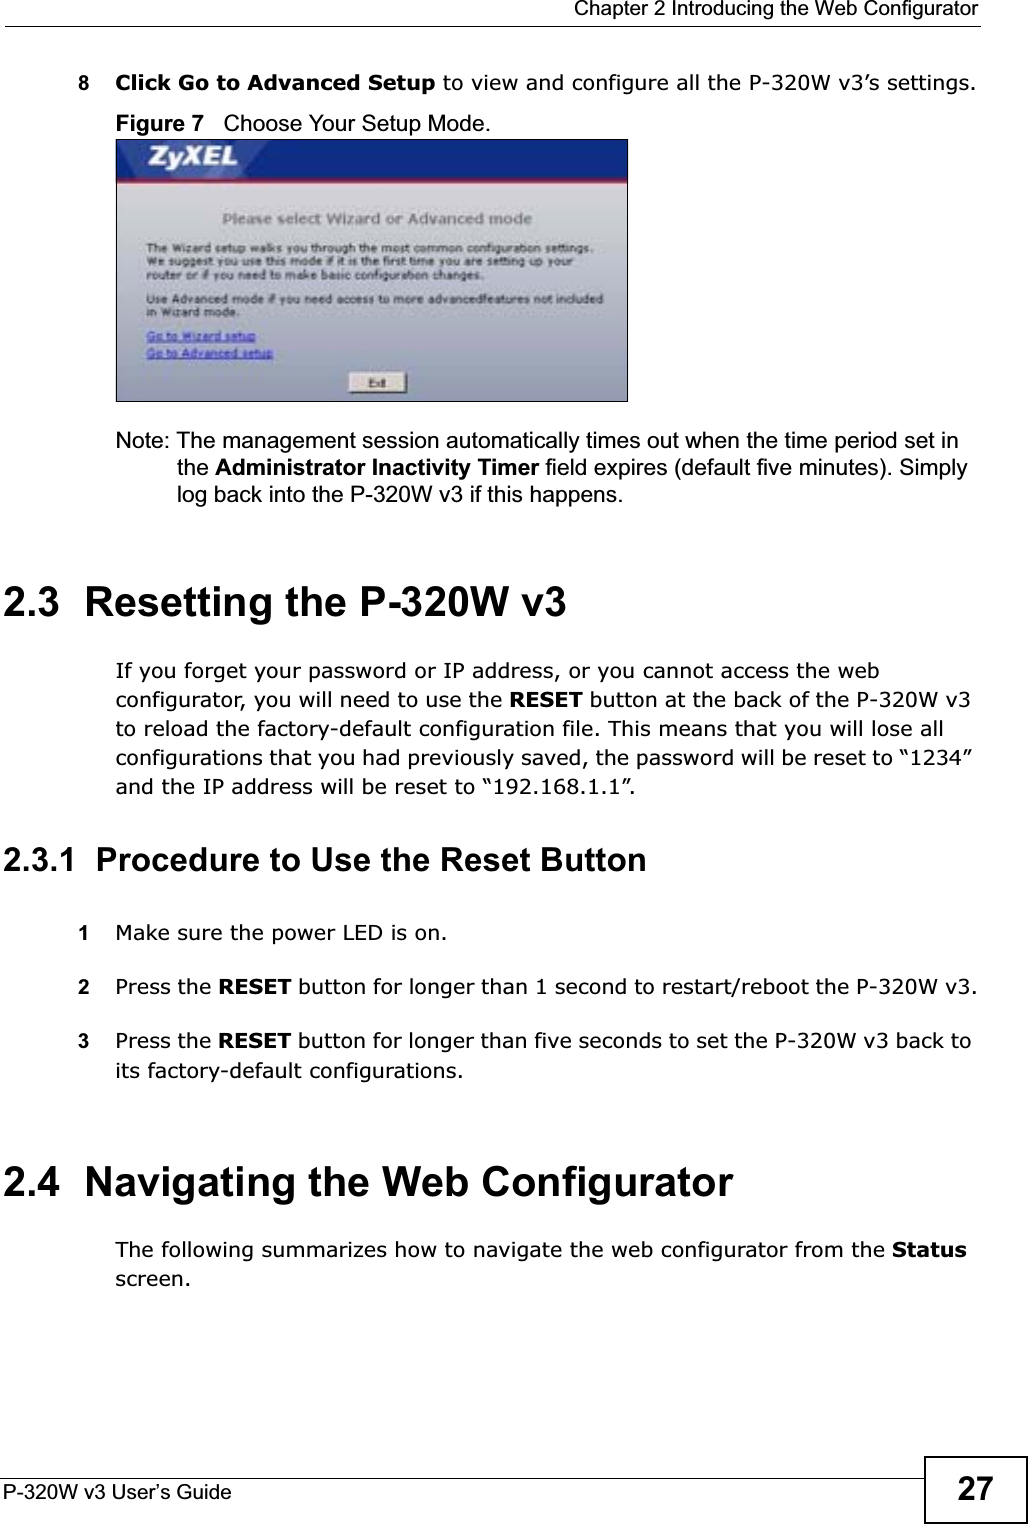  Chapter 2 Introducing the Web ConfiguratorP-320W v3 User’s Guide 278Click Go to Advanced Setup to view and configure all the P-320W v3’s settings.Figure 7   Choose Your Setup Mode.Note: The management session automatically times out when the time period set in the Administrator Inactivity Timer field expires (default five minutes). Simply log back into the P-320W v3 if this happens.2.3  Resetting the P-320W v3If you forget your password or IP address, or you cannot access the web configurator, you will need to use the RESET button at the back of the P-320W v3 to reload the factory-default configuration file. This means that you will lose all configurations that you had previously saved, the password will be reset to “1234” and the IP address will be reset to “192.168.1.1”.2.3.1  Procedure to Use the Reset Button1Make sure the power LED is on.2Press the RESET button for longer than 1 second to restart/reboot the P-320W v3.3Press the RESET button for longer than five seconds to set the P-320W v3 back to its factory-default configurations.2.4  Navigating the Web Configurator    The following summarizes how to navigate the web configurator from the Statusscreen. 